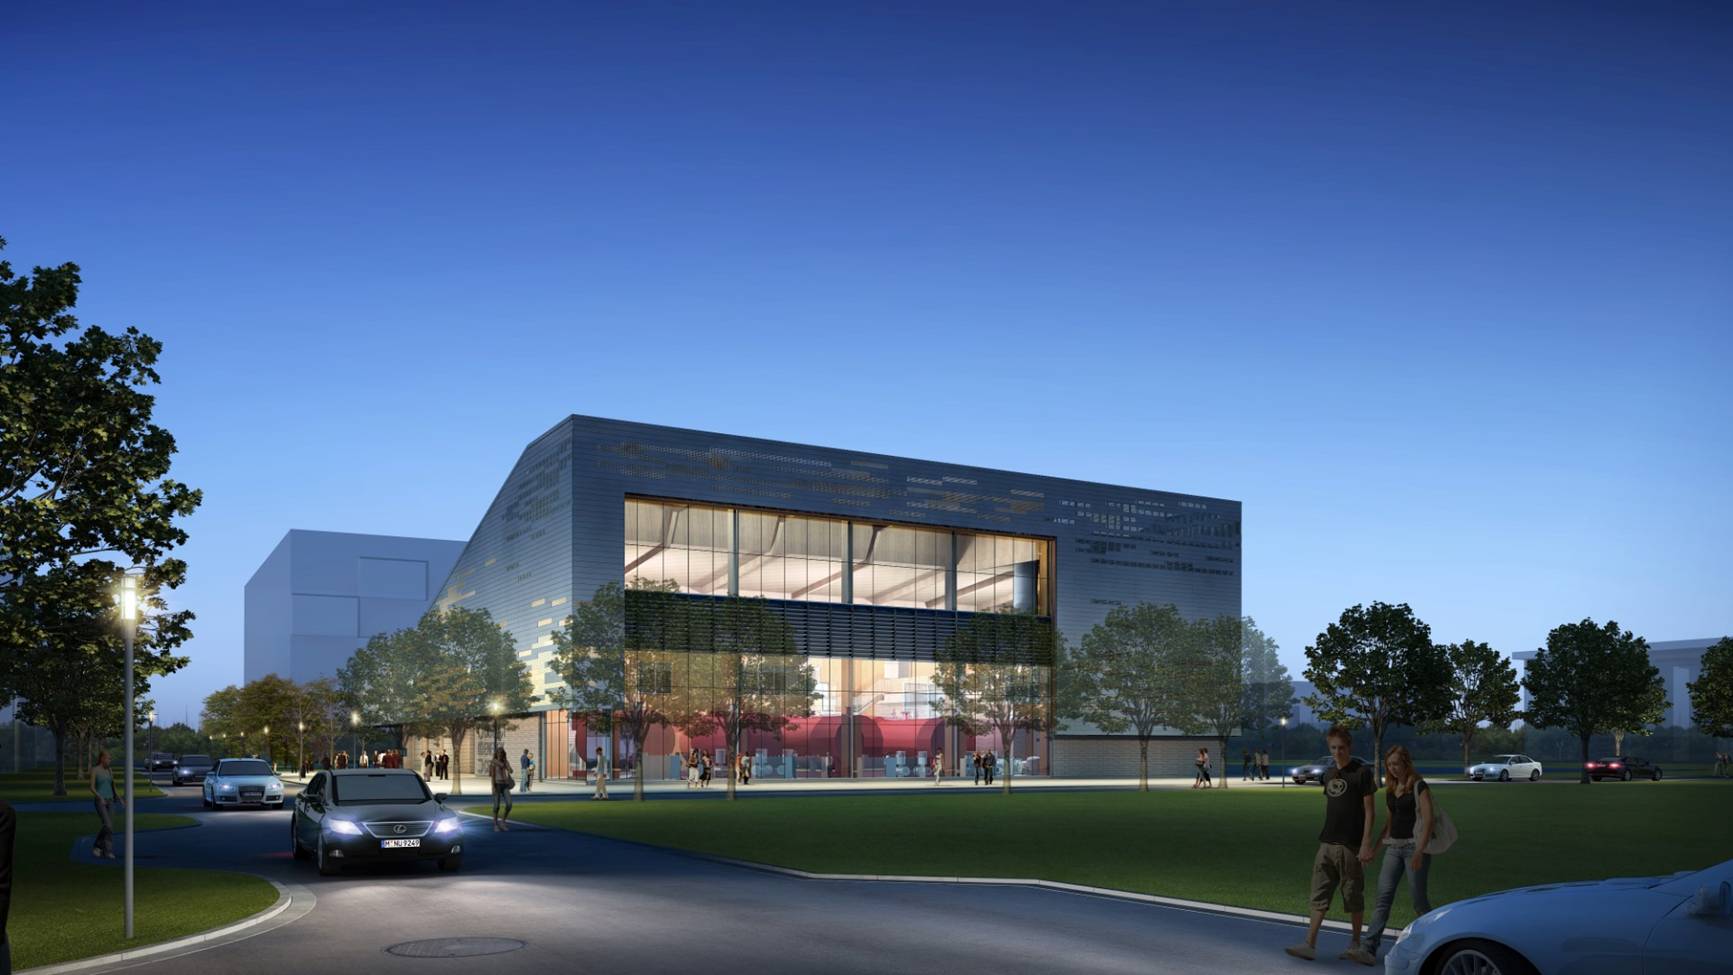 The Campus Energy Centre will is schedule to be in operation in the fall of 2015